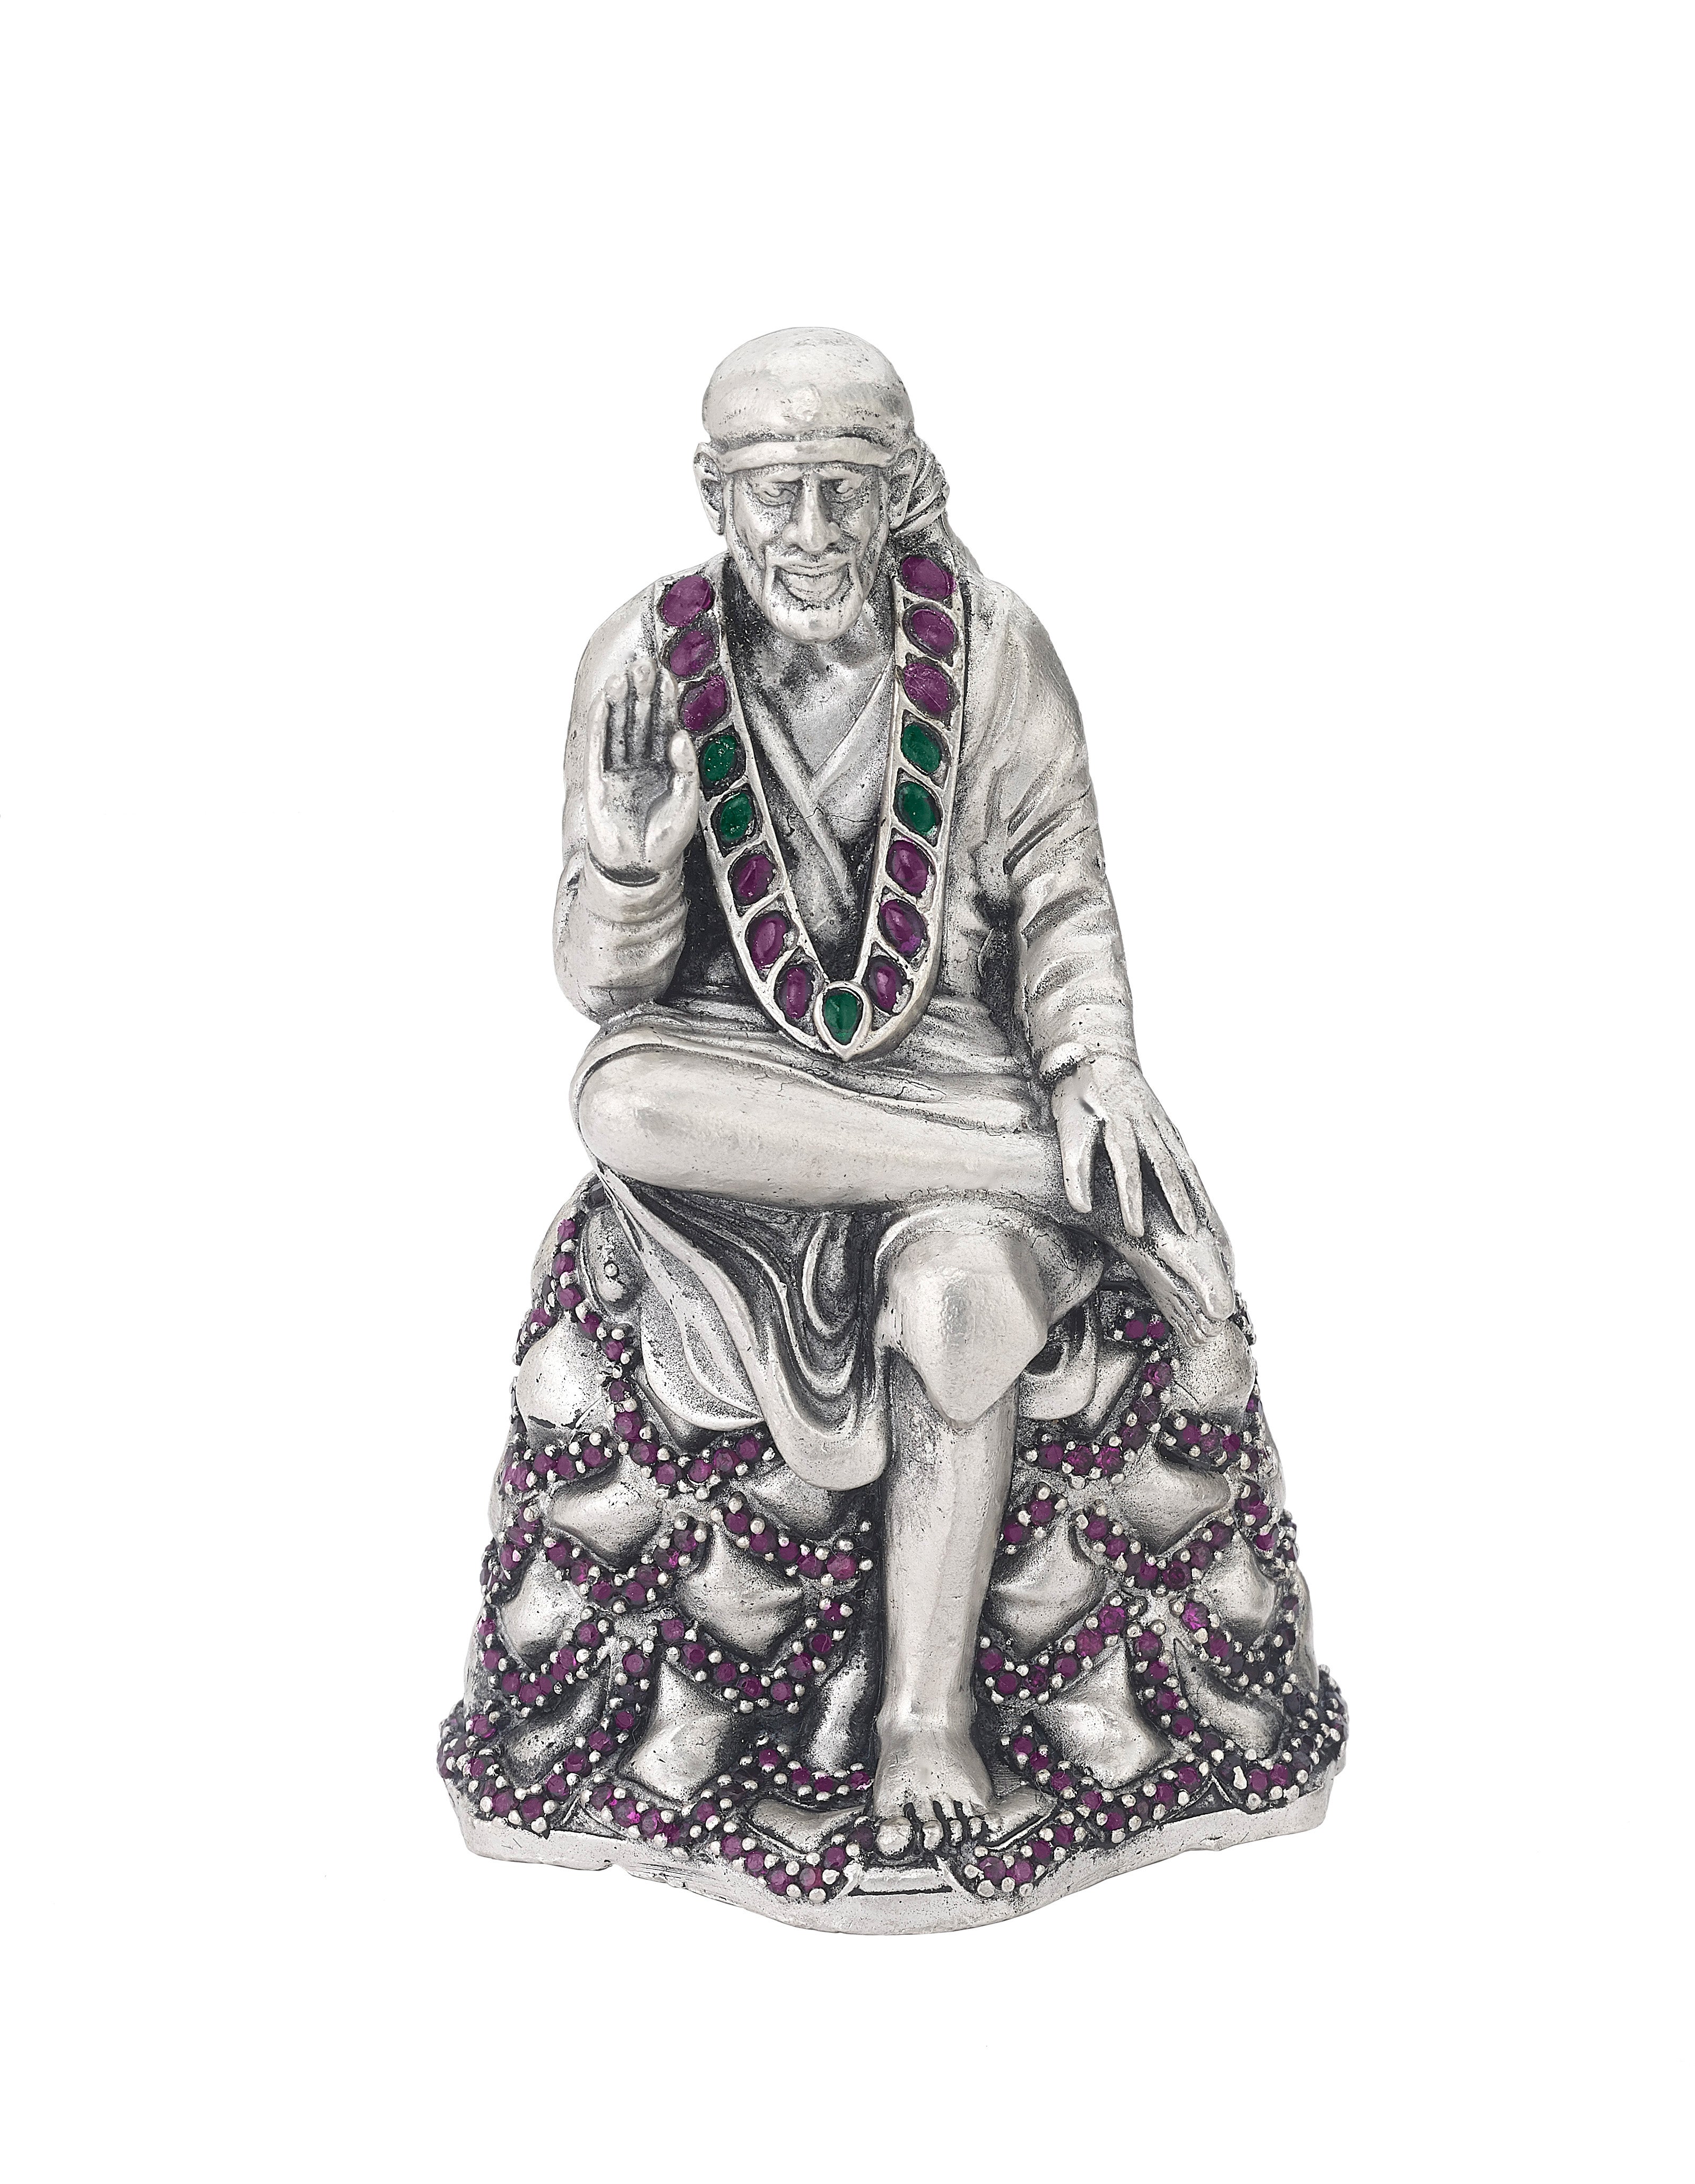 Divinely Crafted Sterling Silver Lord Sai Baba Statue